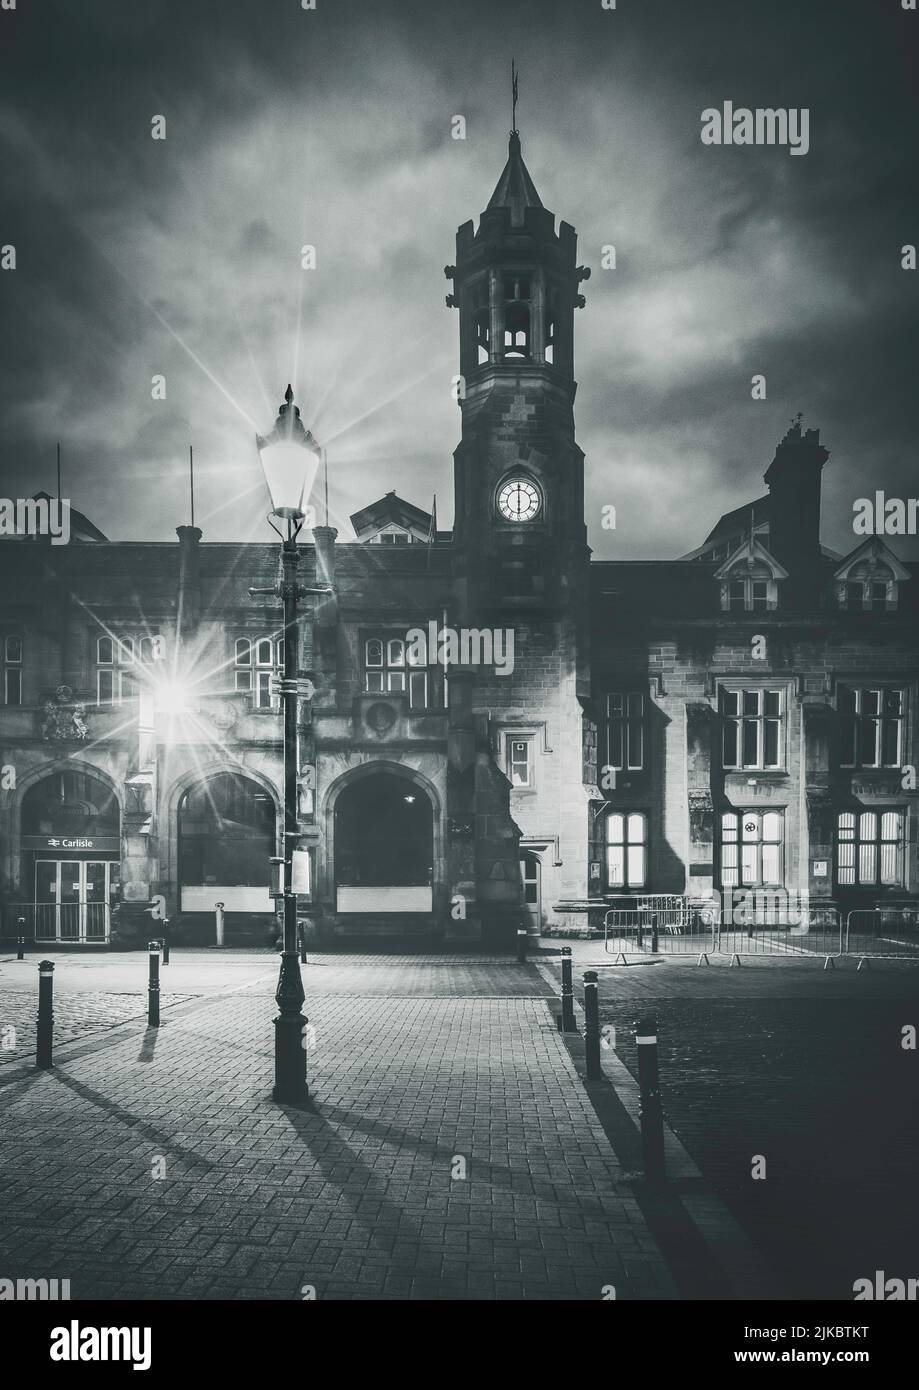 The impressive architecture of Carlisle Citadel Station including Clock Tower captured on an atmospheric morning. Stock Photo